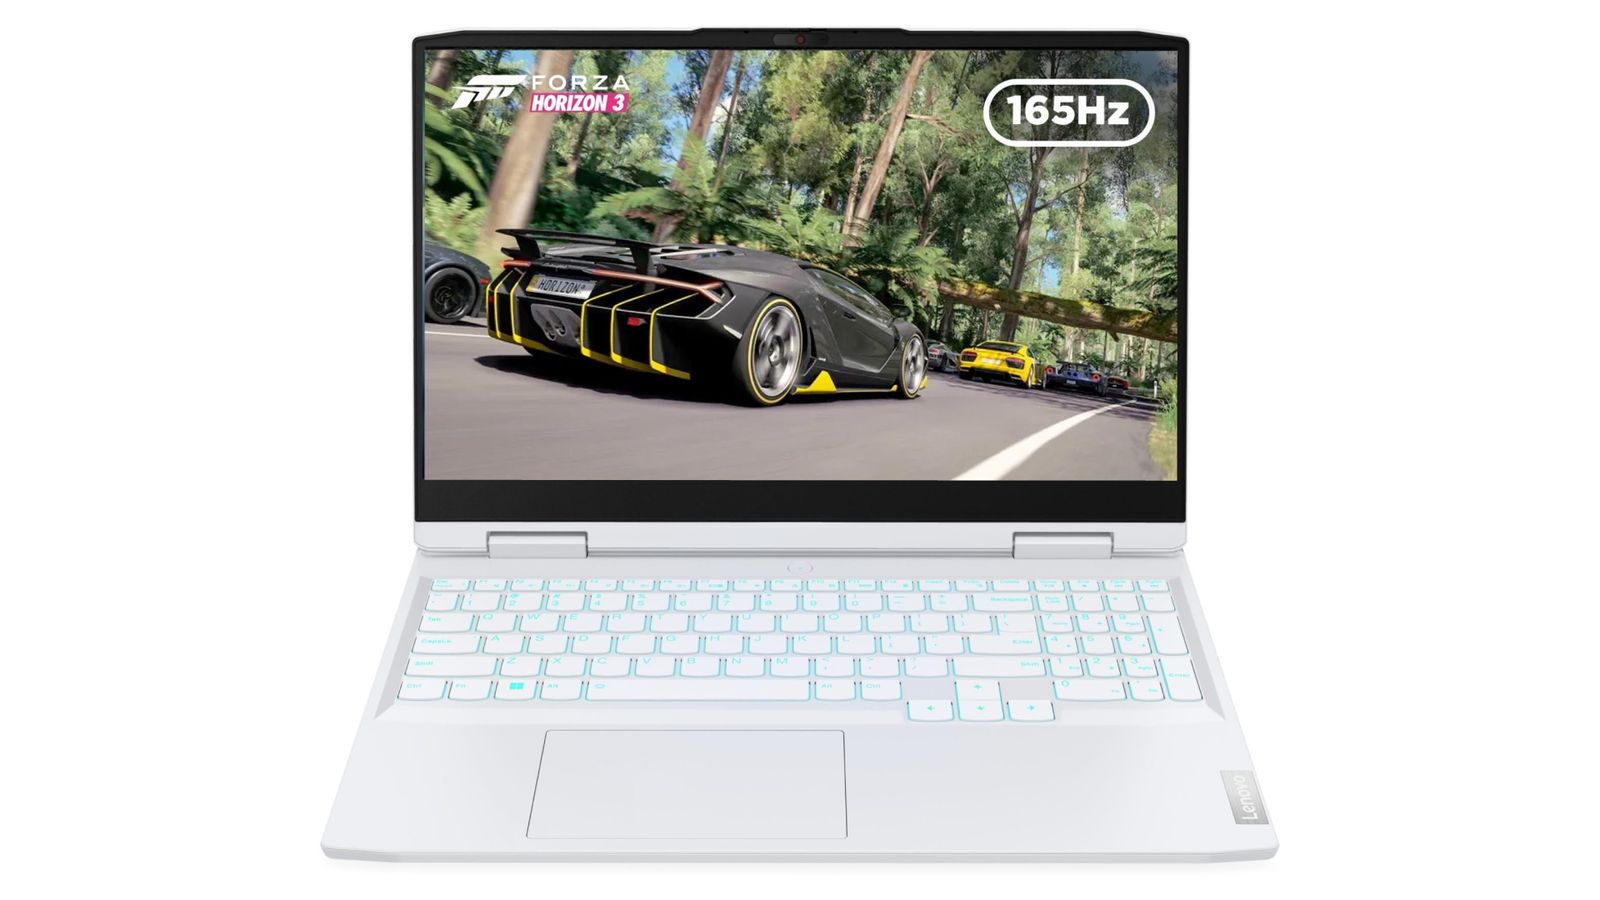 Best Redfall gaming laptop - Lenovo IdeaPad Gaming 3 product image of a white laptop with an image of a black supercar from Forza Horizon on the display.